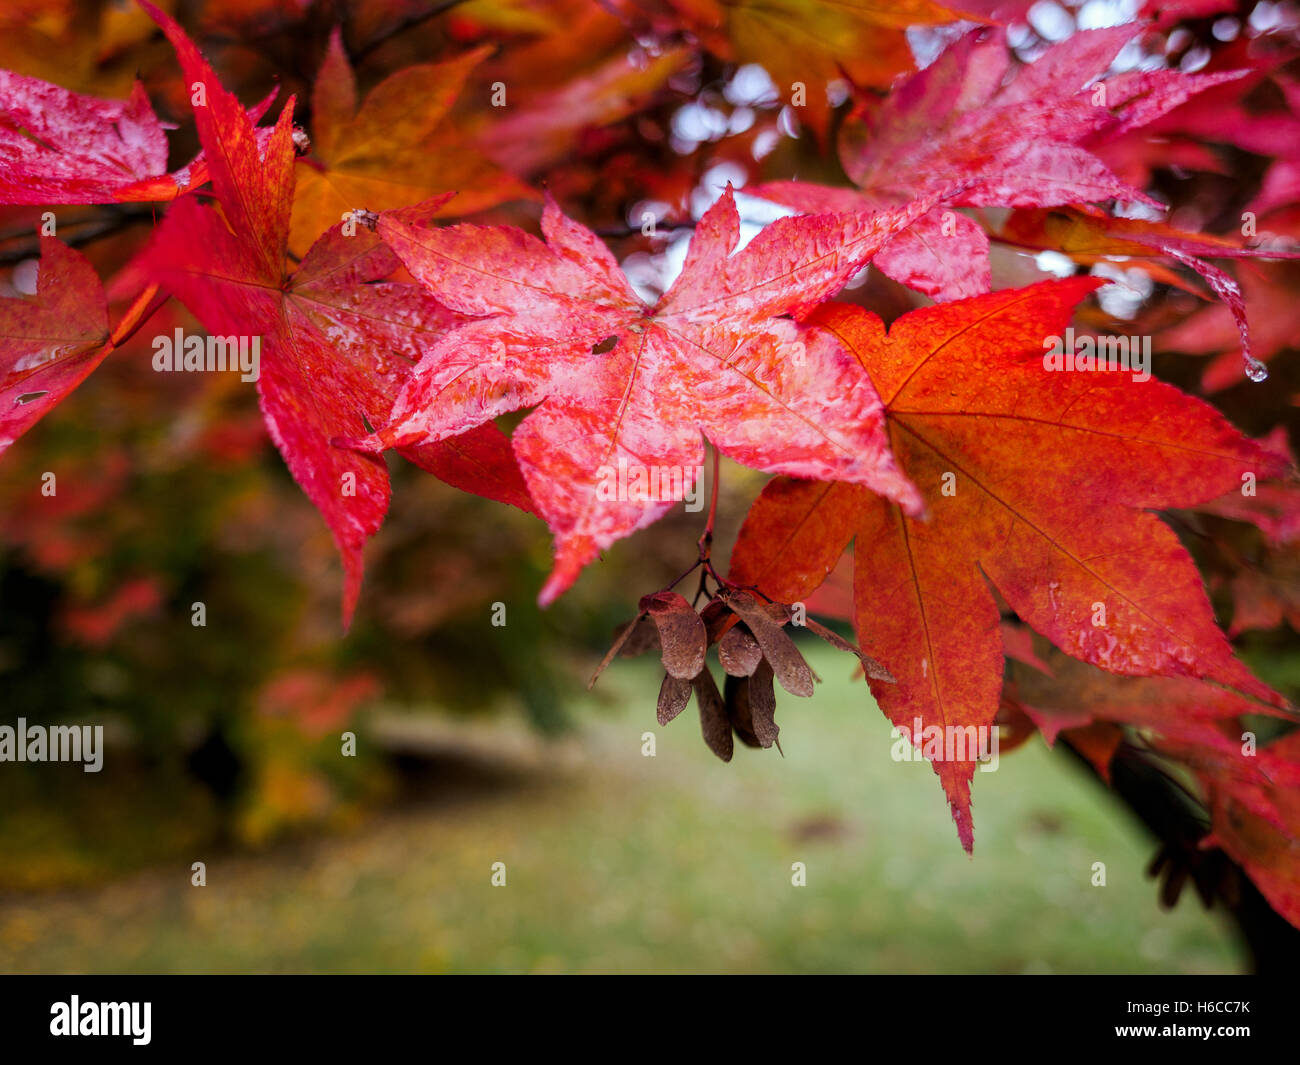 Acer Tree Leaves Changing Colour in Autumn Stock Photo